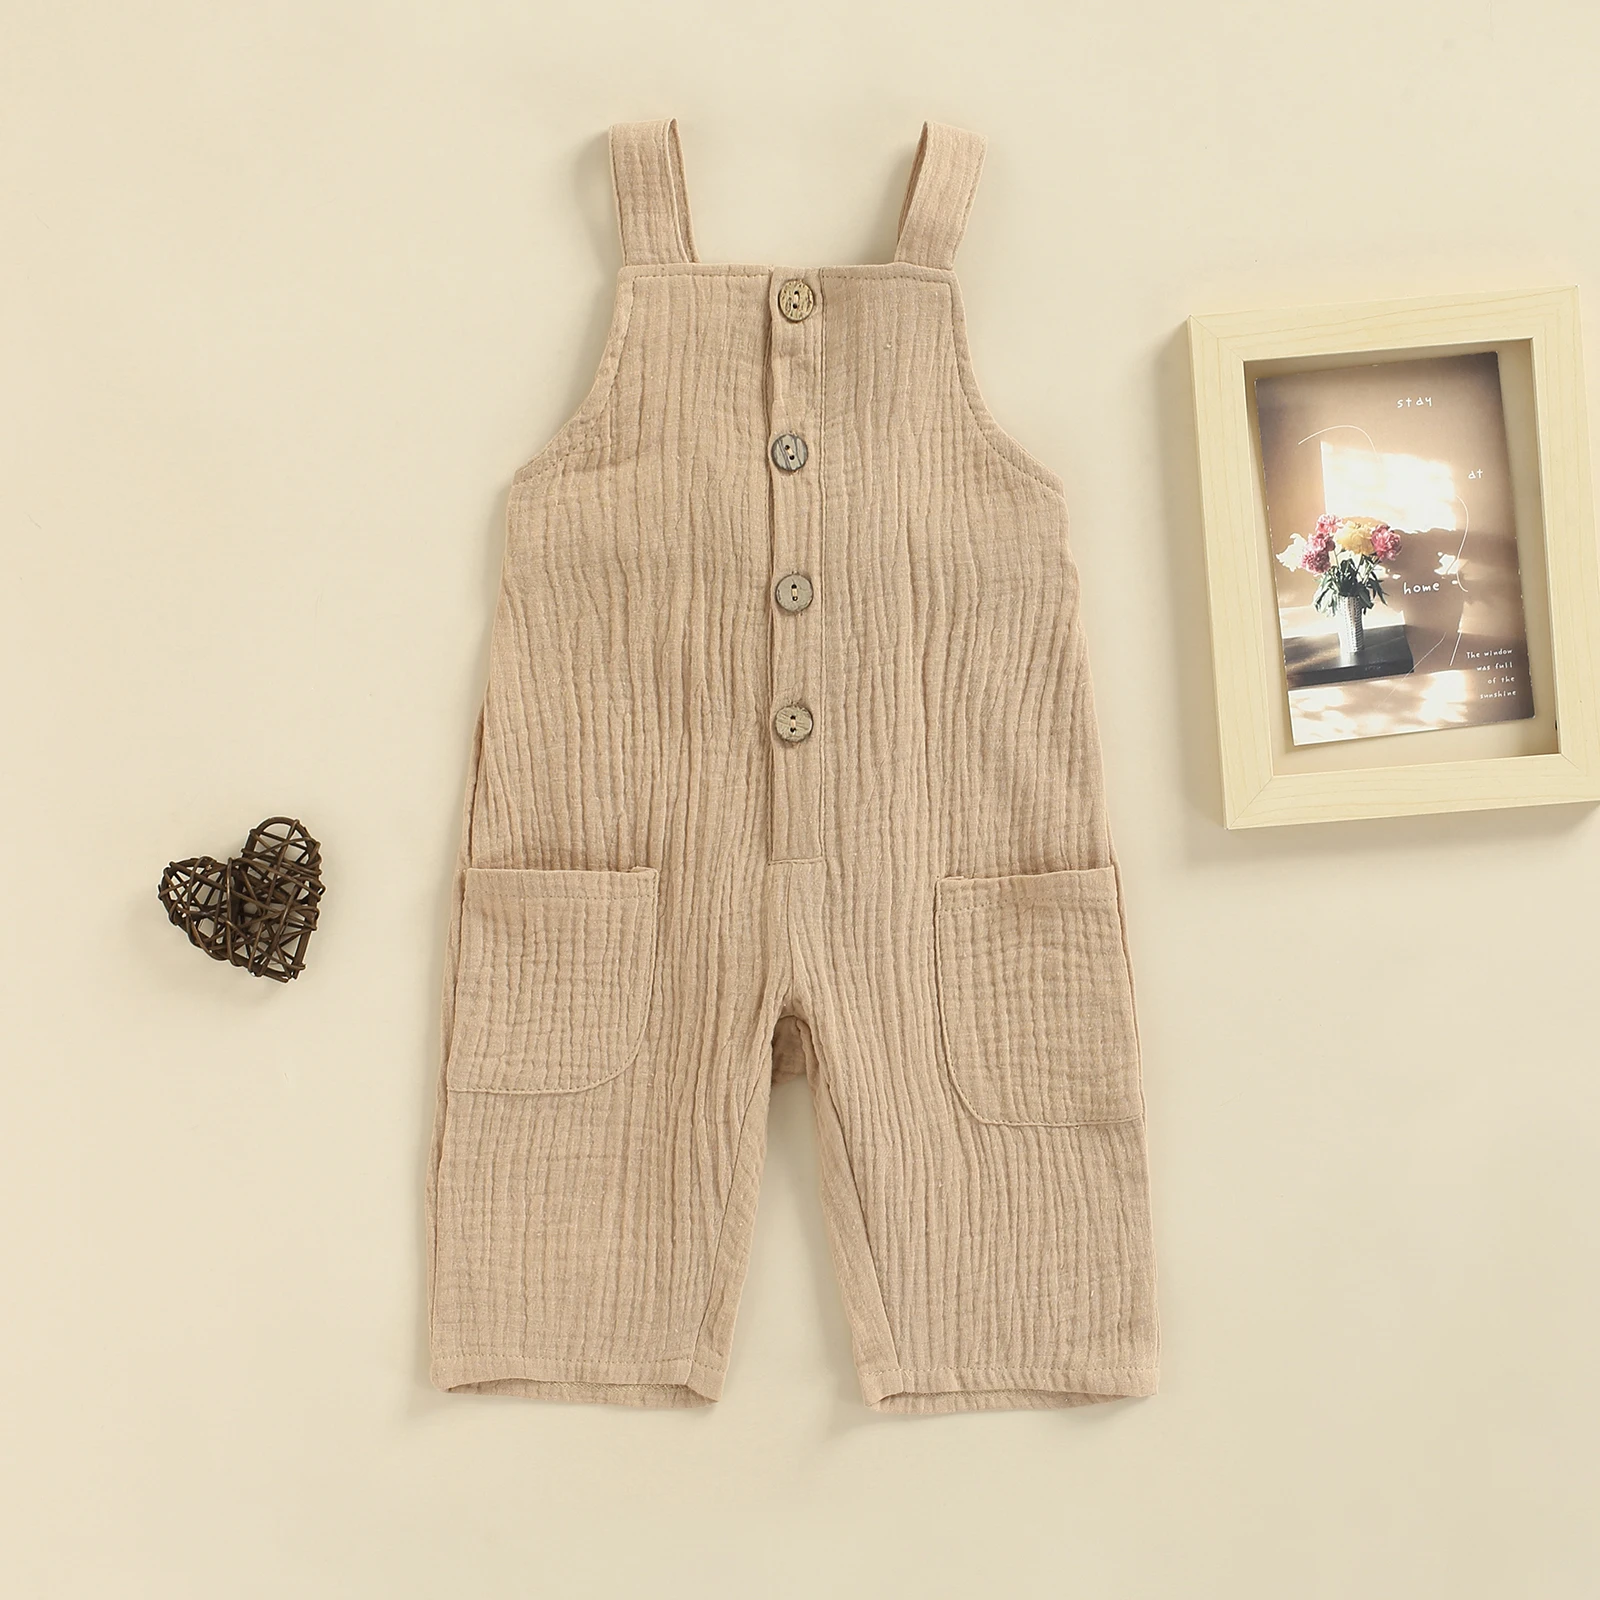 Bamboo fiber children's clothes Cotton Linen Casual Solid Children Jumpsuit Toddler Square Collar Sleeveless Button-down Suspender Trousers For Girls Boys Cute Infant Baby Girls Romper